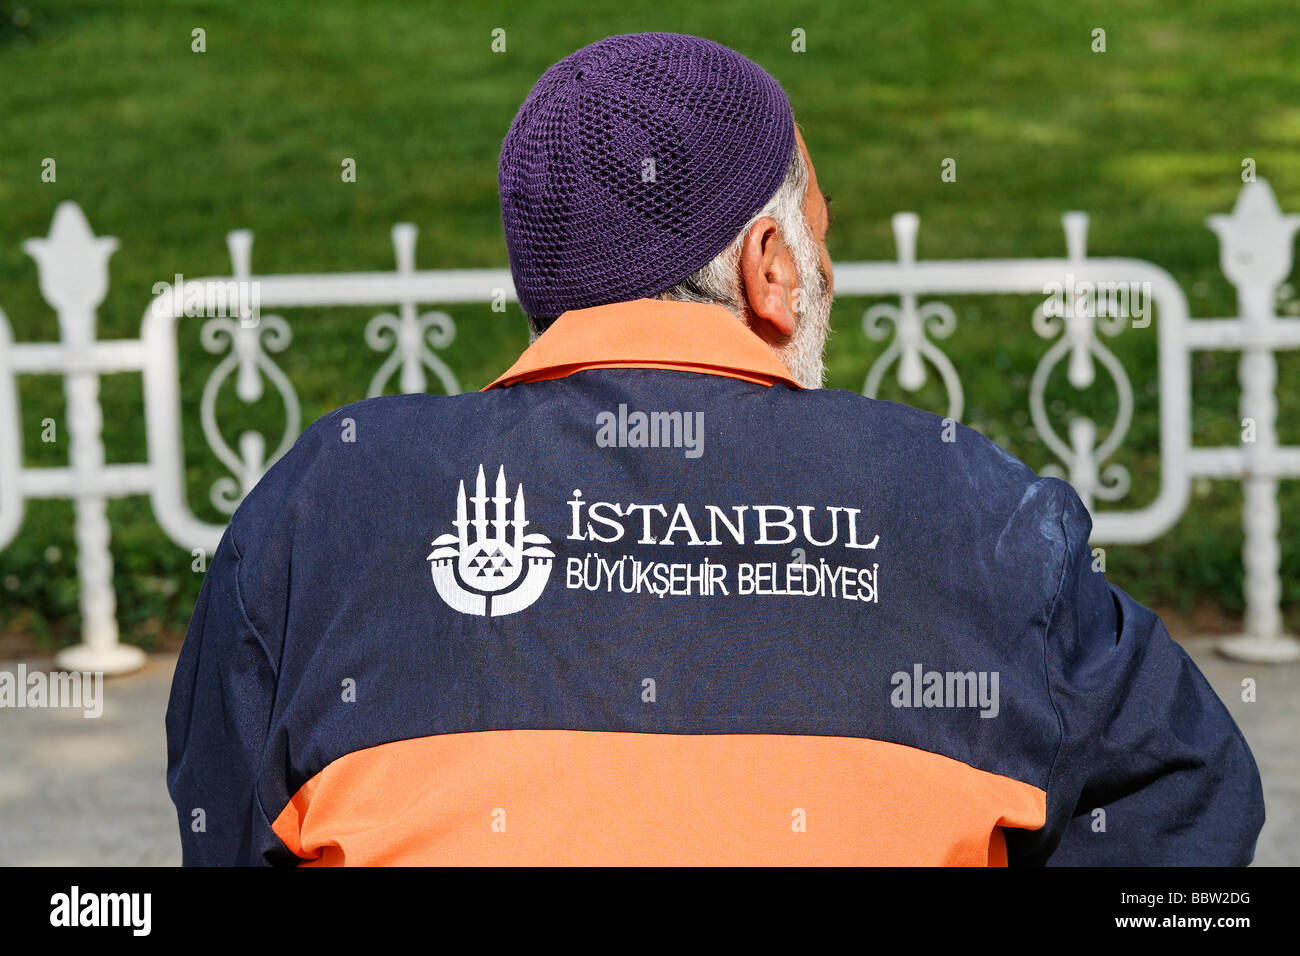 Staff of the Municipal Gardens, large logo on the dress, back view, Sultanahmet, Istanbul, Turkey Stock Photo